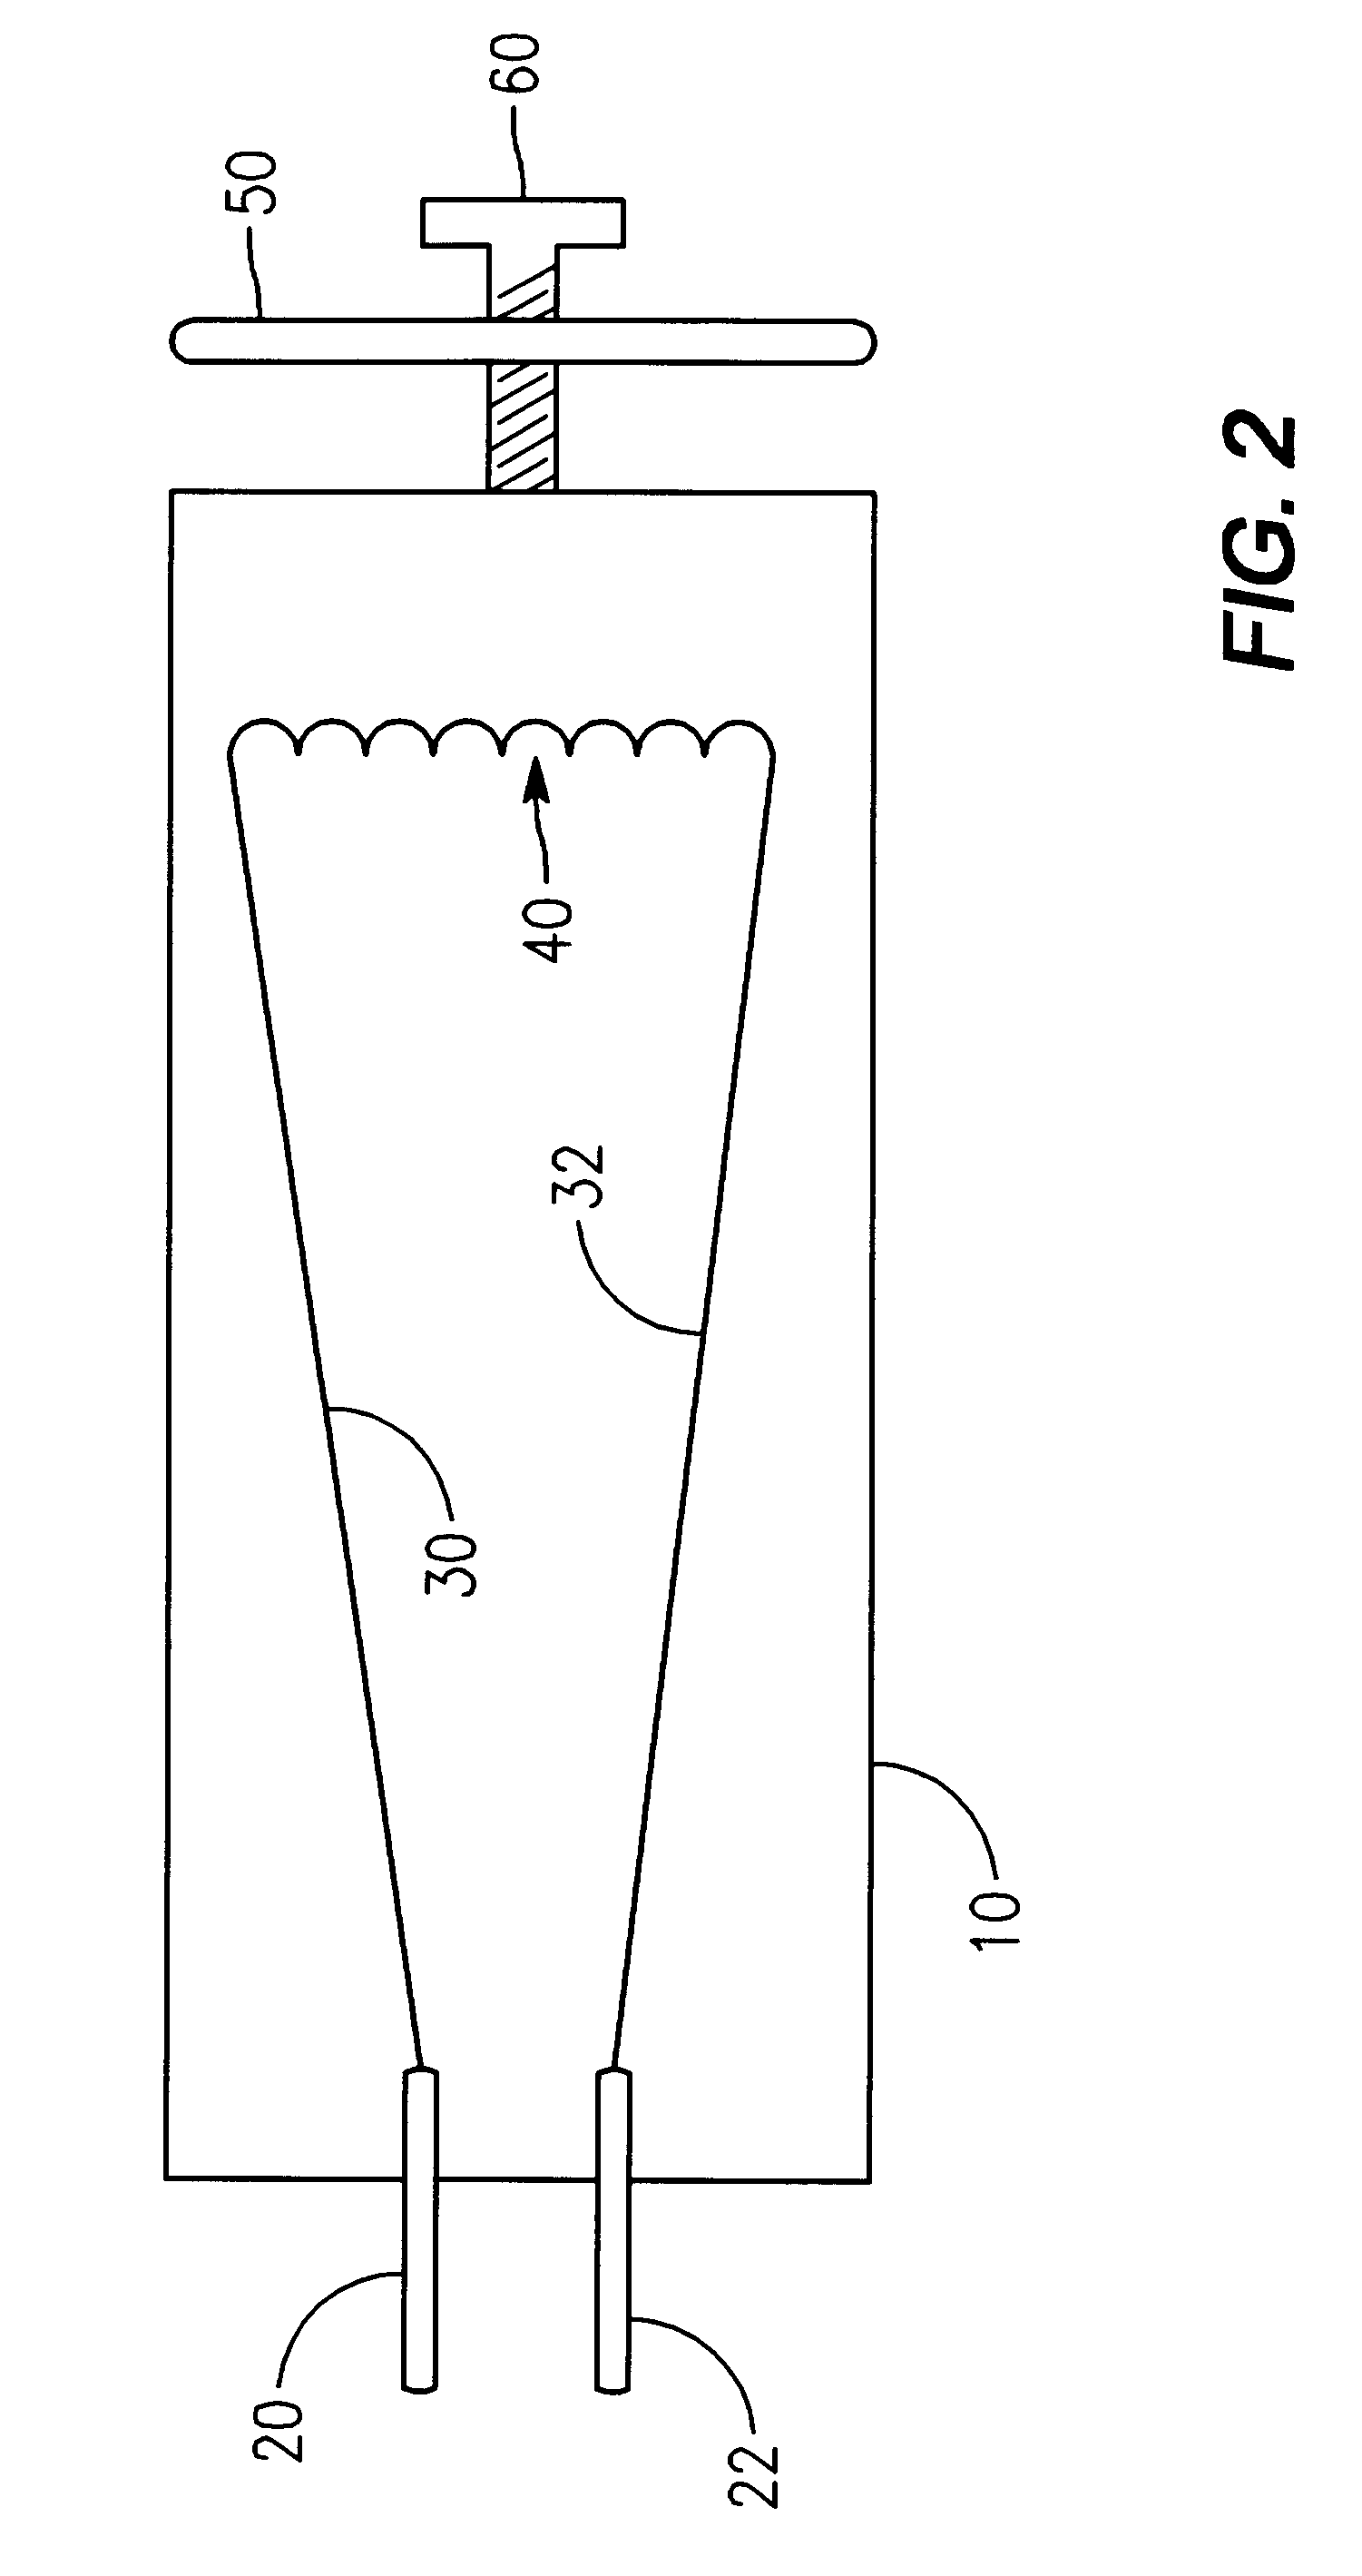 Apparatus for detecting a completed electrical circuit and testing an electrical output receptacle